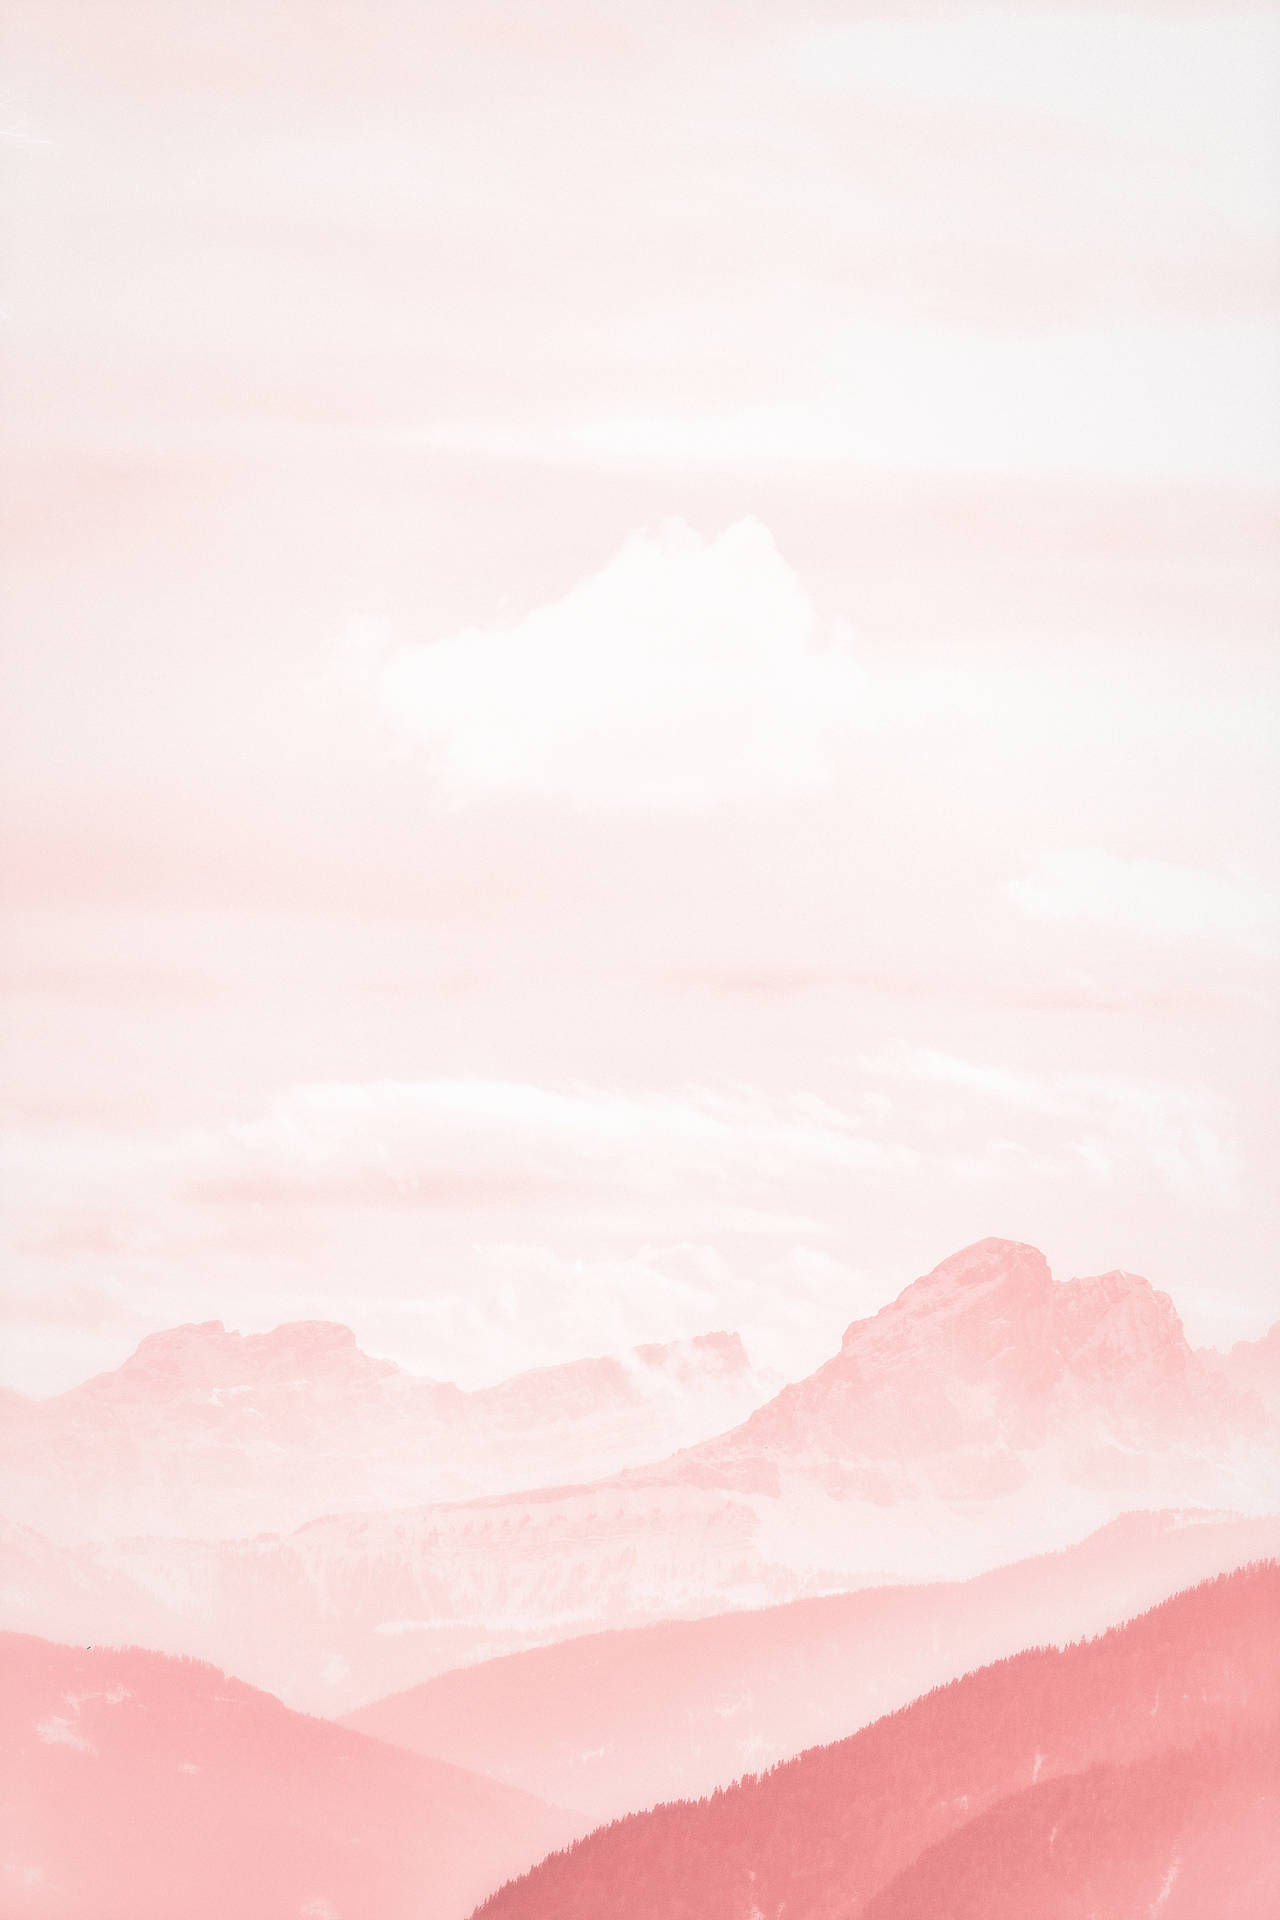 Calm Aesthetic Pink Mountain Background